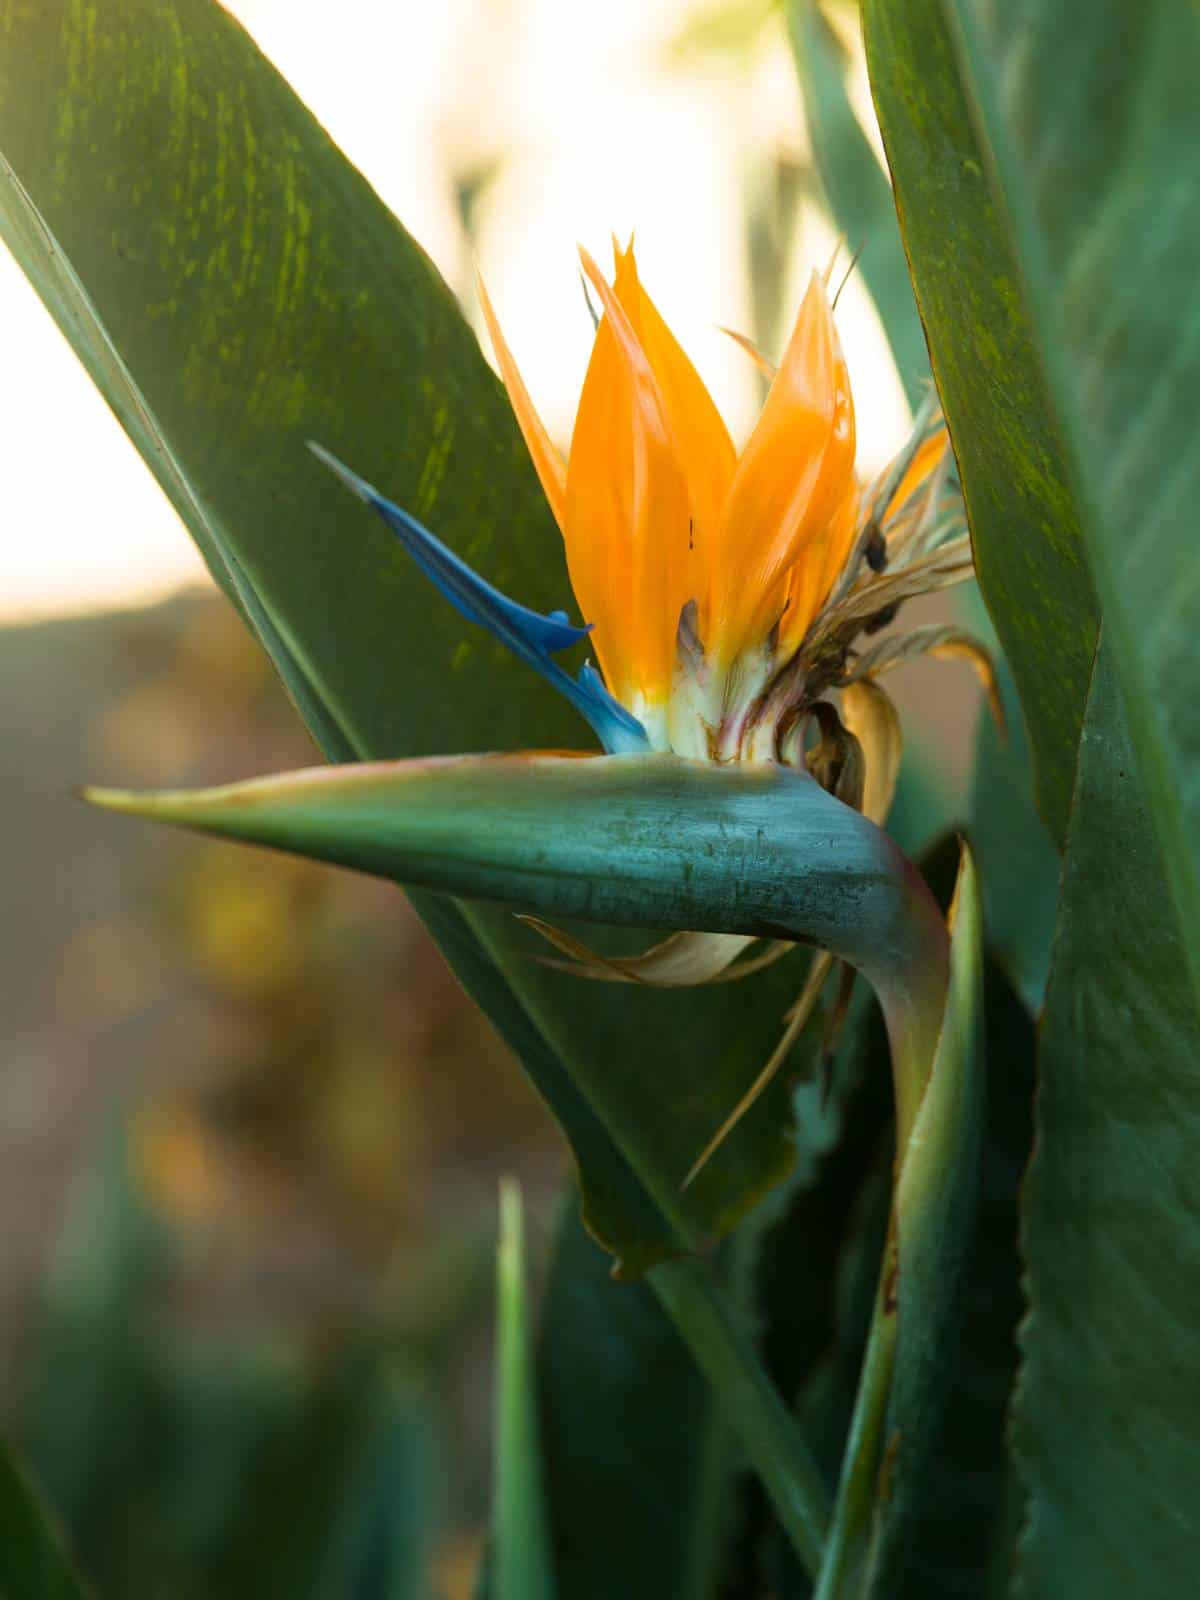 How to Grow and Care for Bird of Paradise